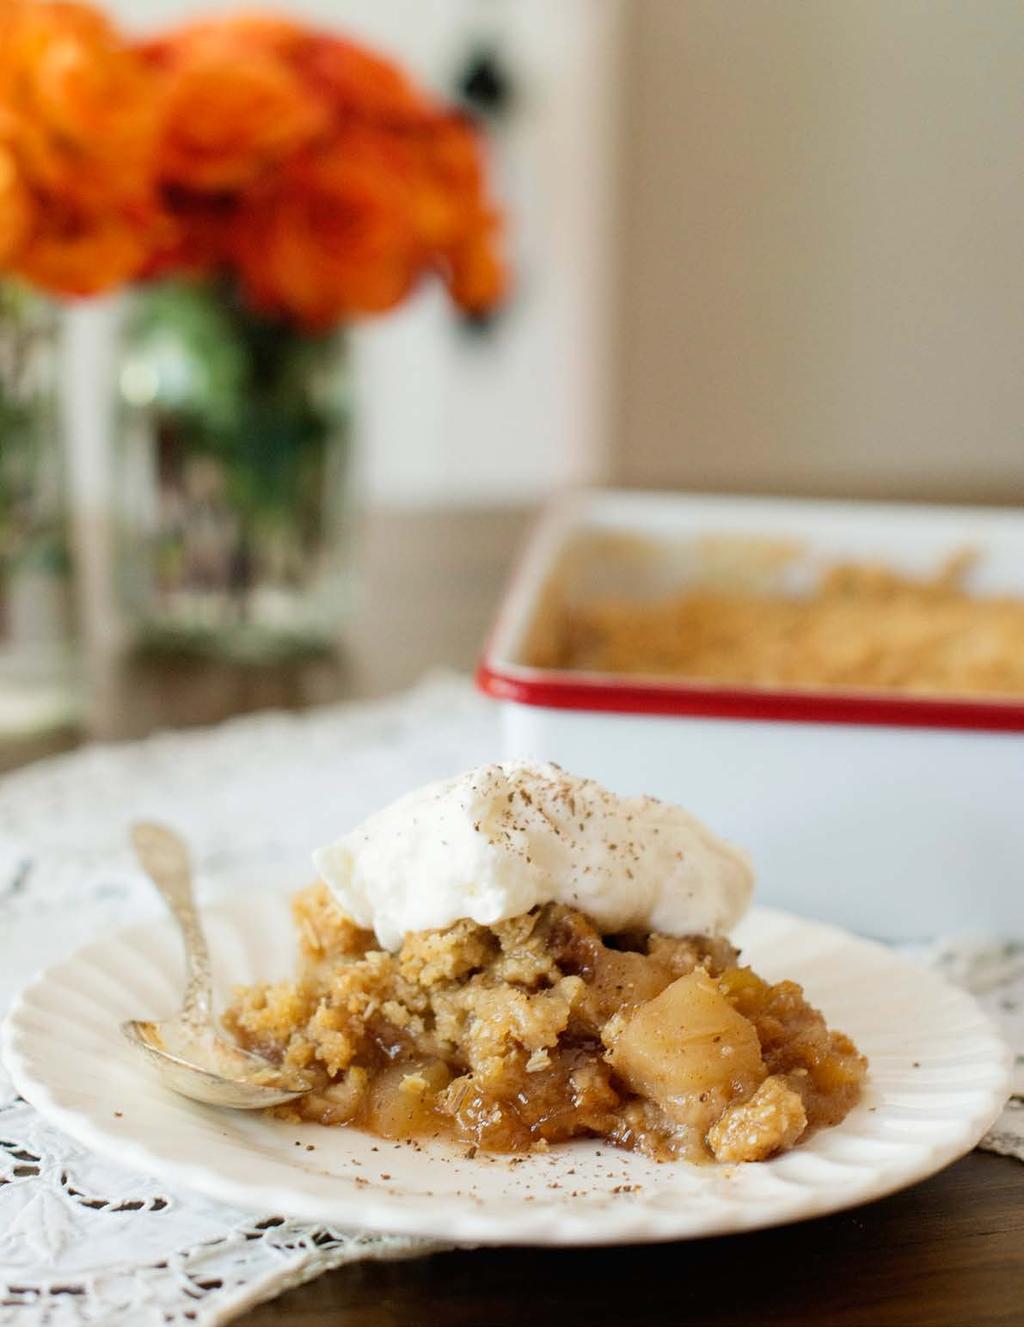 Apple Crisp Apple crisp is one of my top 5 favorite desserts. It fills my house with the sweet smell of fall while it bakes, and it takes a lot less time to prepare than a pie.